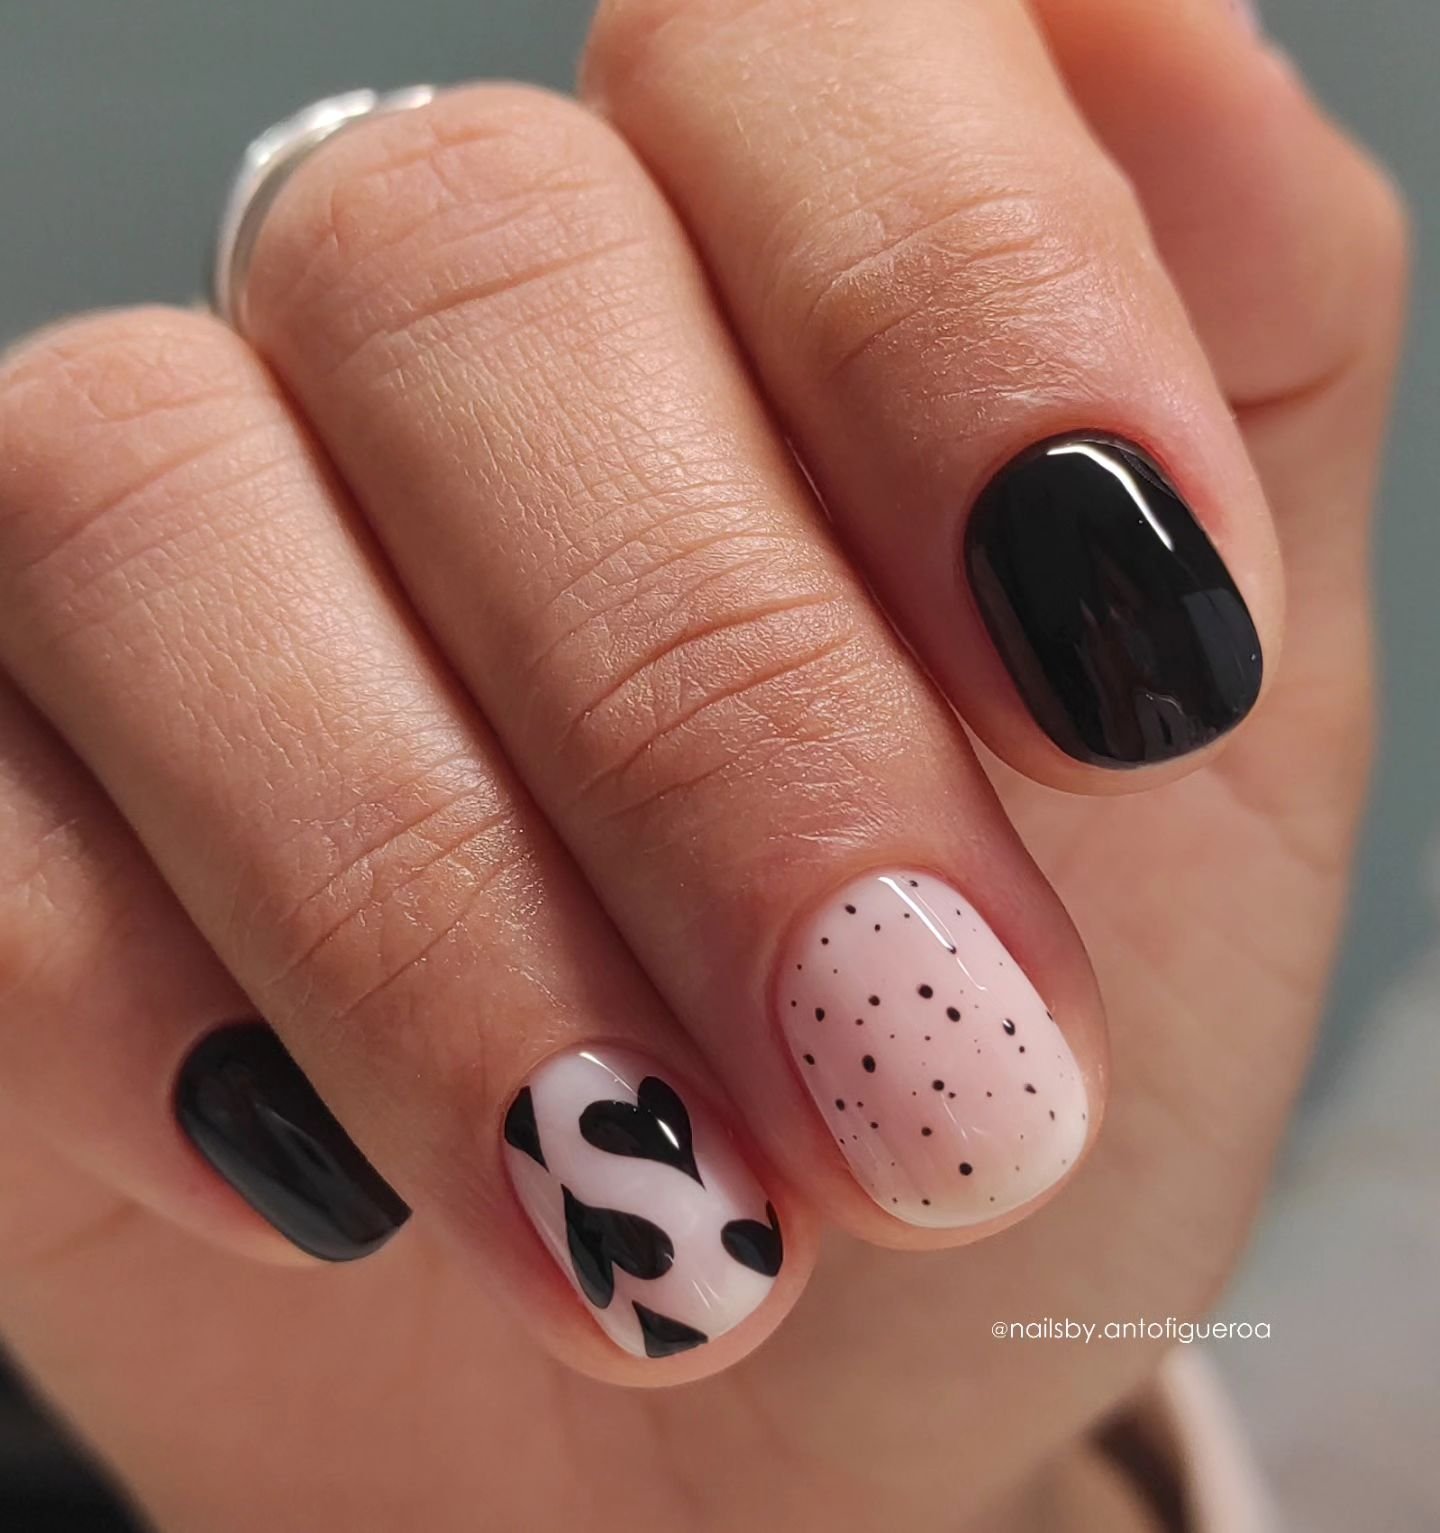 21 - Picture of Black Nails